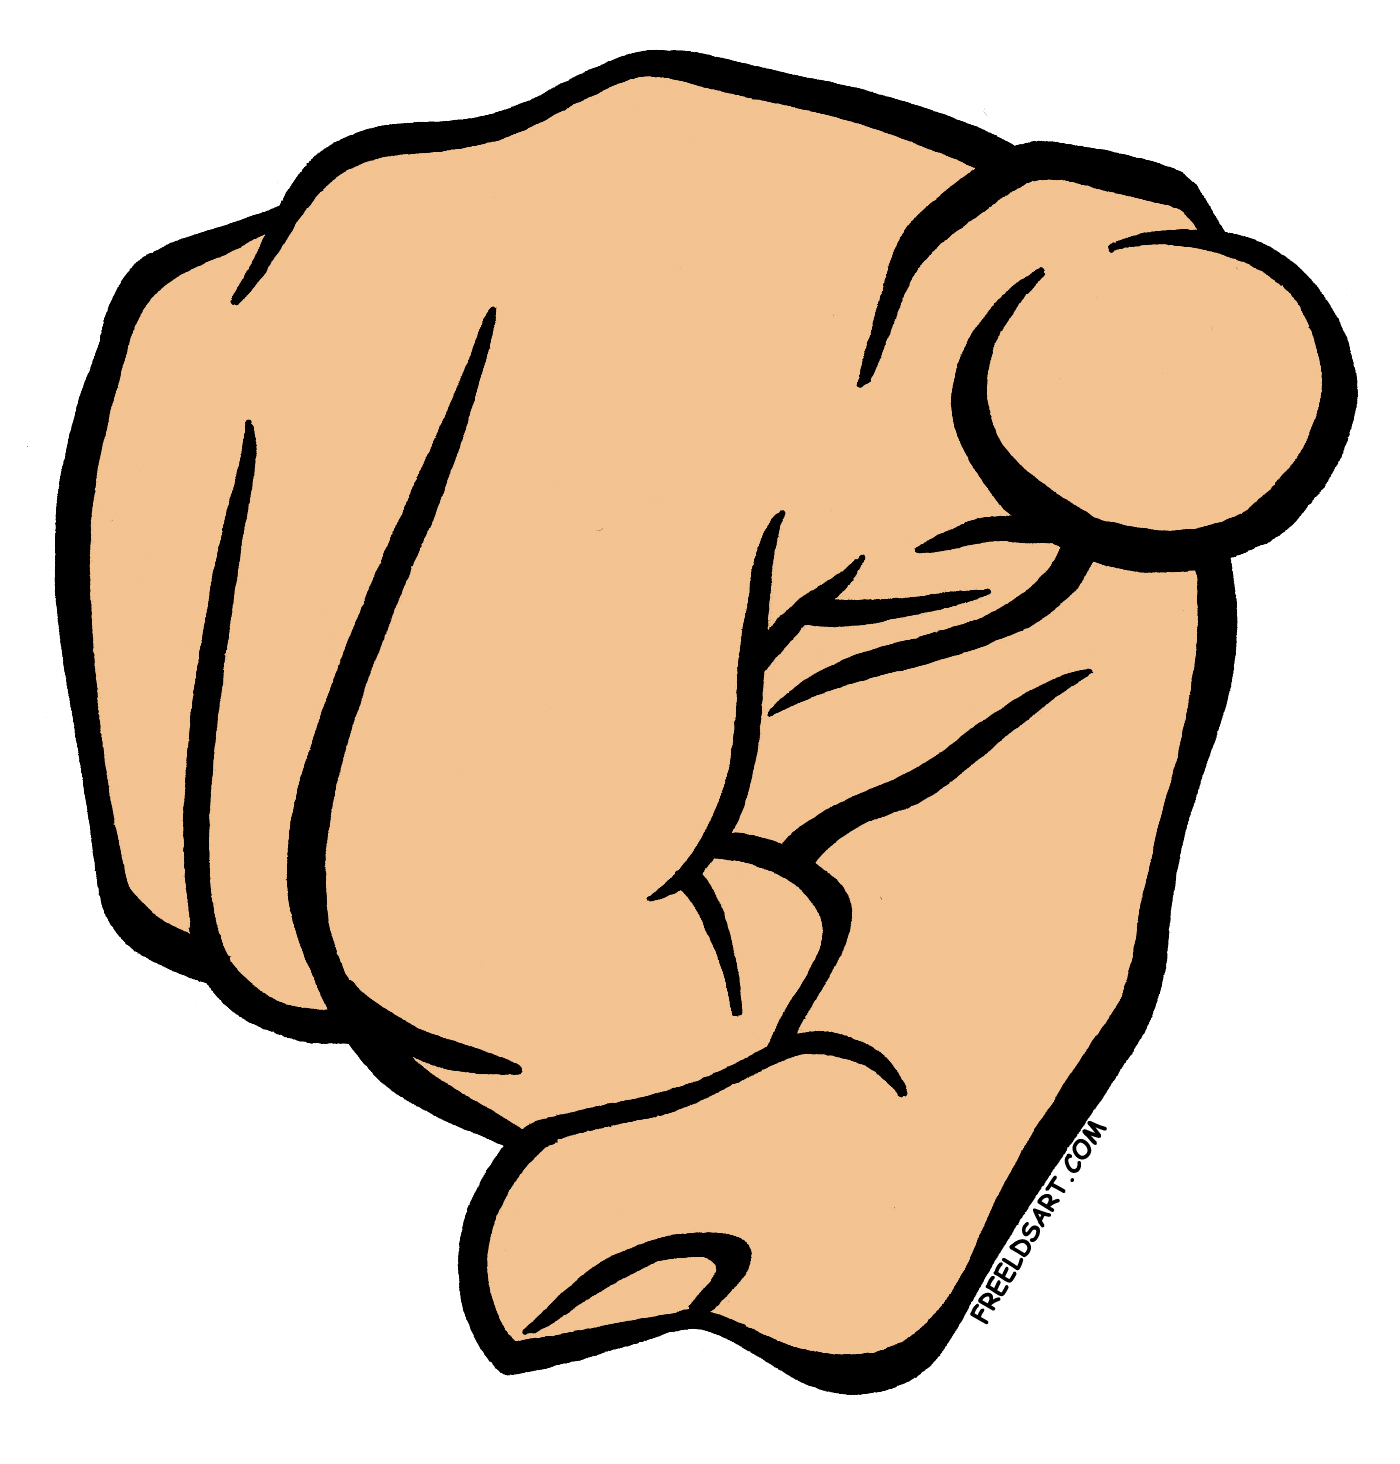 Finger Pointing Clipart | Clipart Panda - Free Clipart Images